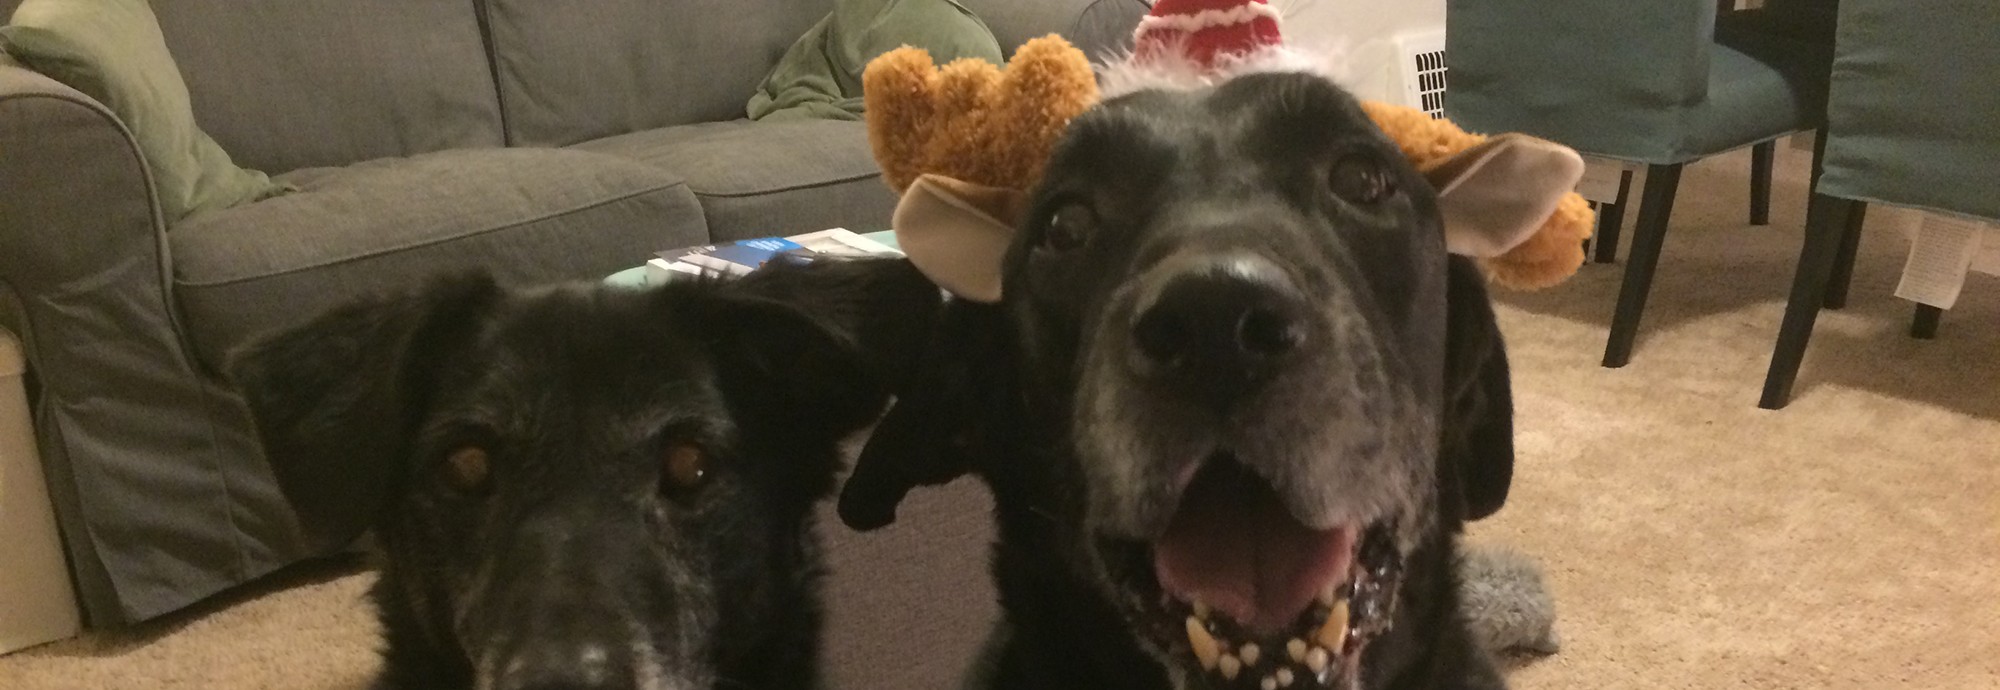 beloved Walter, wearing antlers, and Ellie, both looking right at the camera